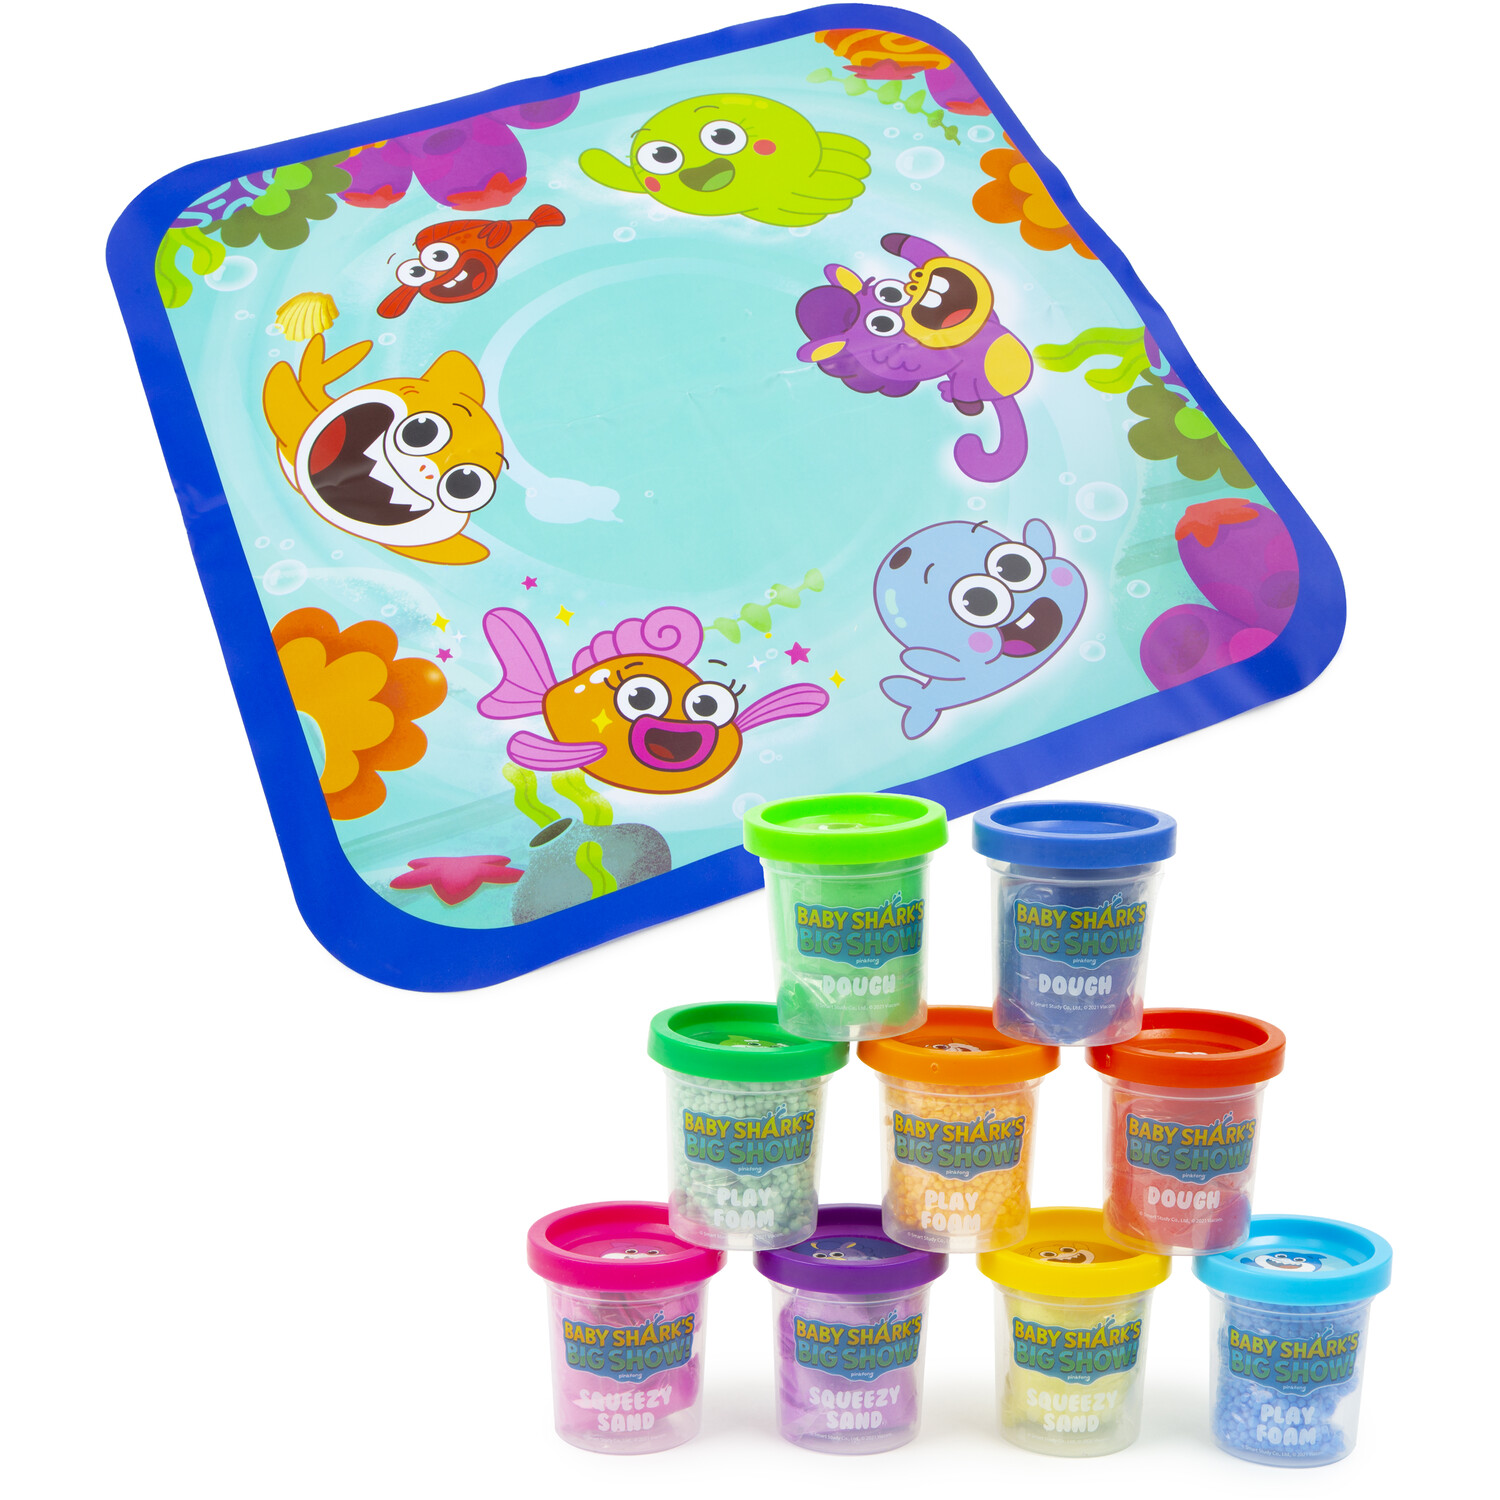 Baby Shark's Big Show Touch and Feel Play Set Image 2